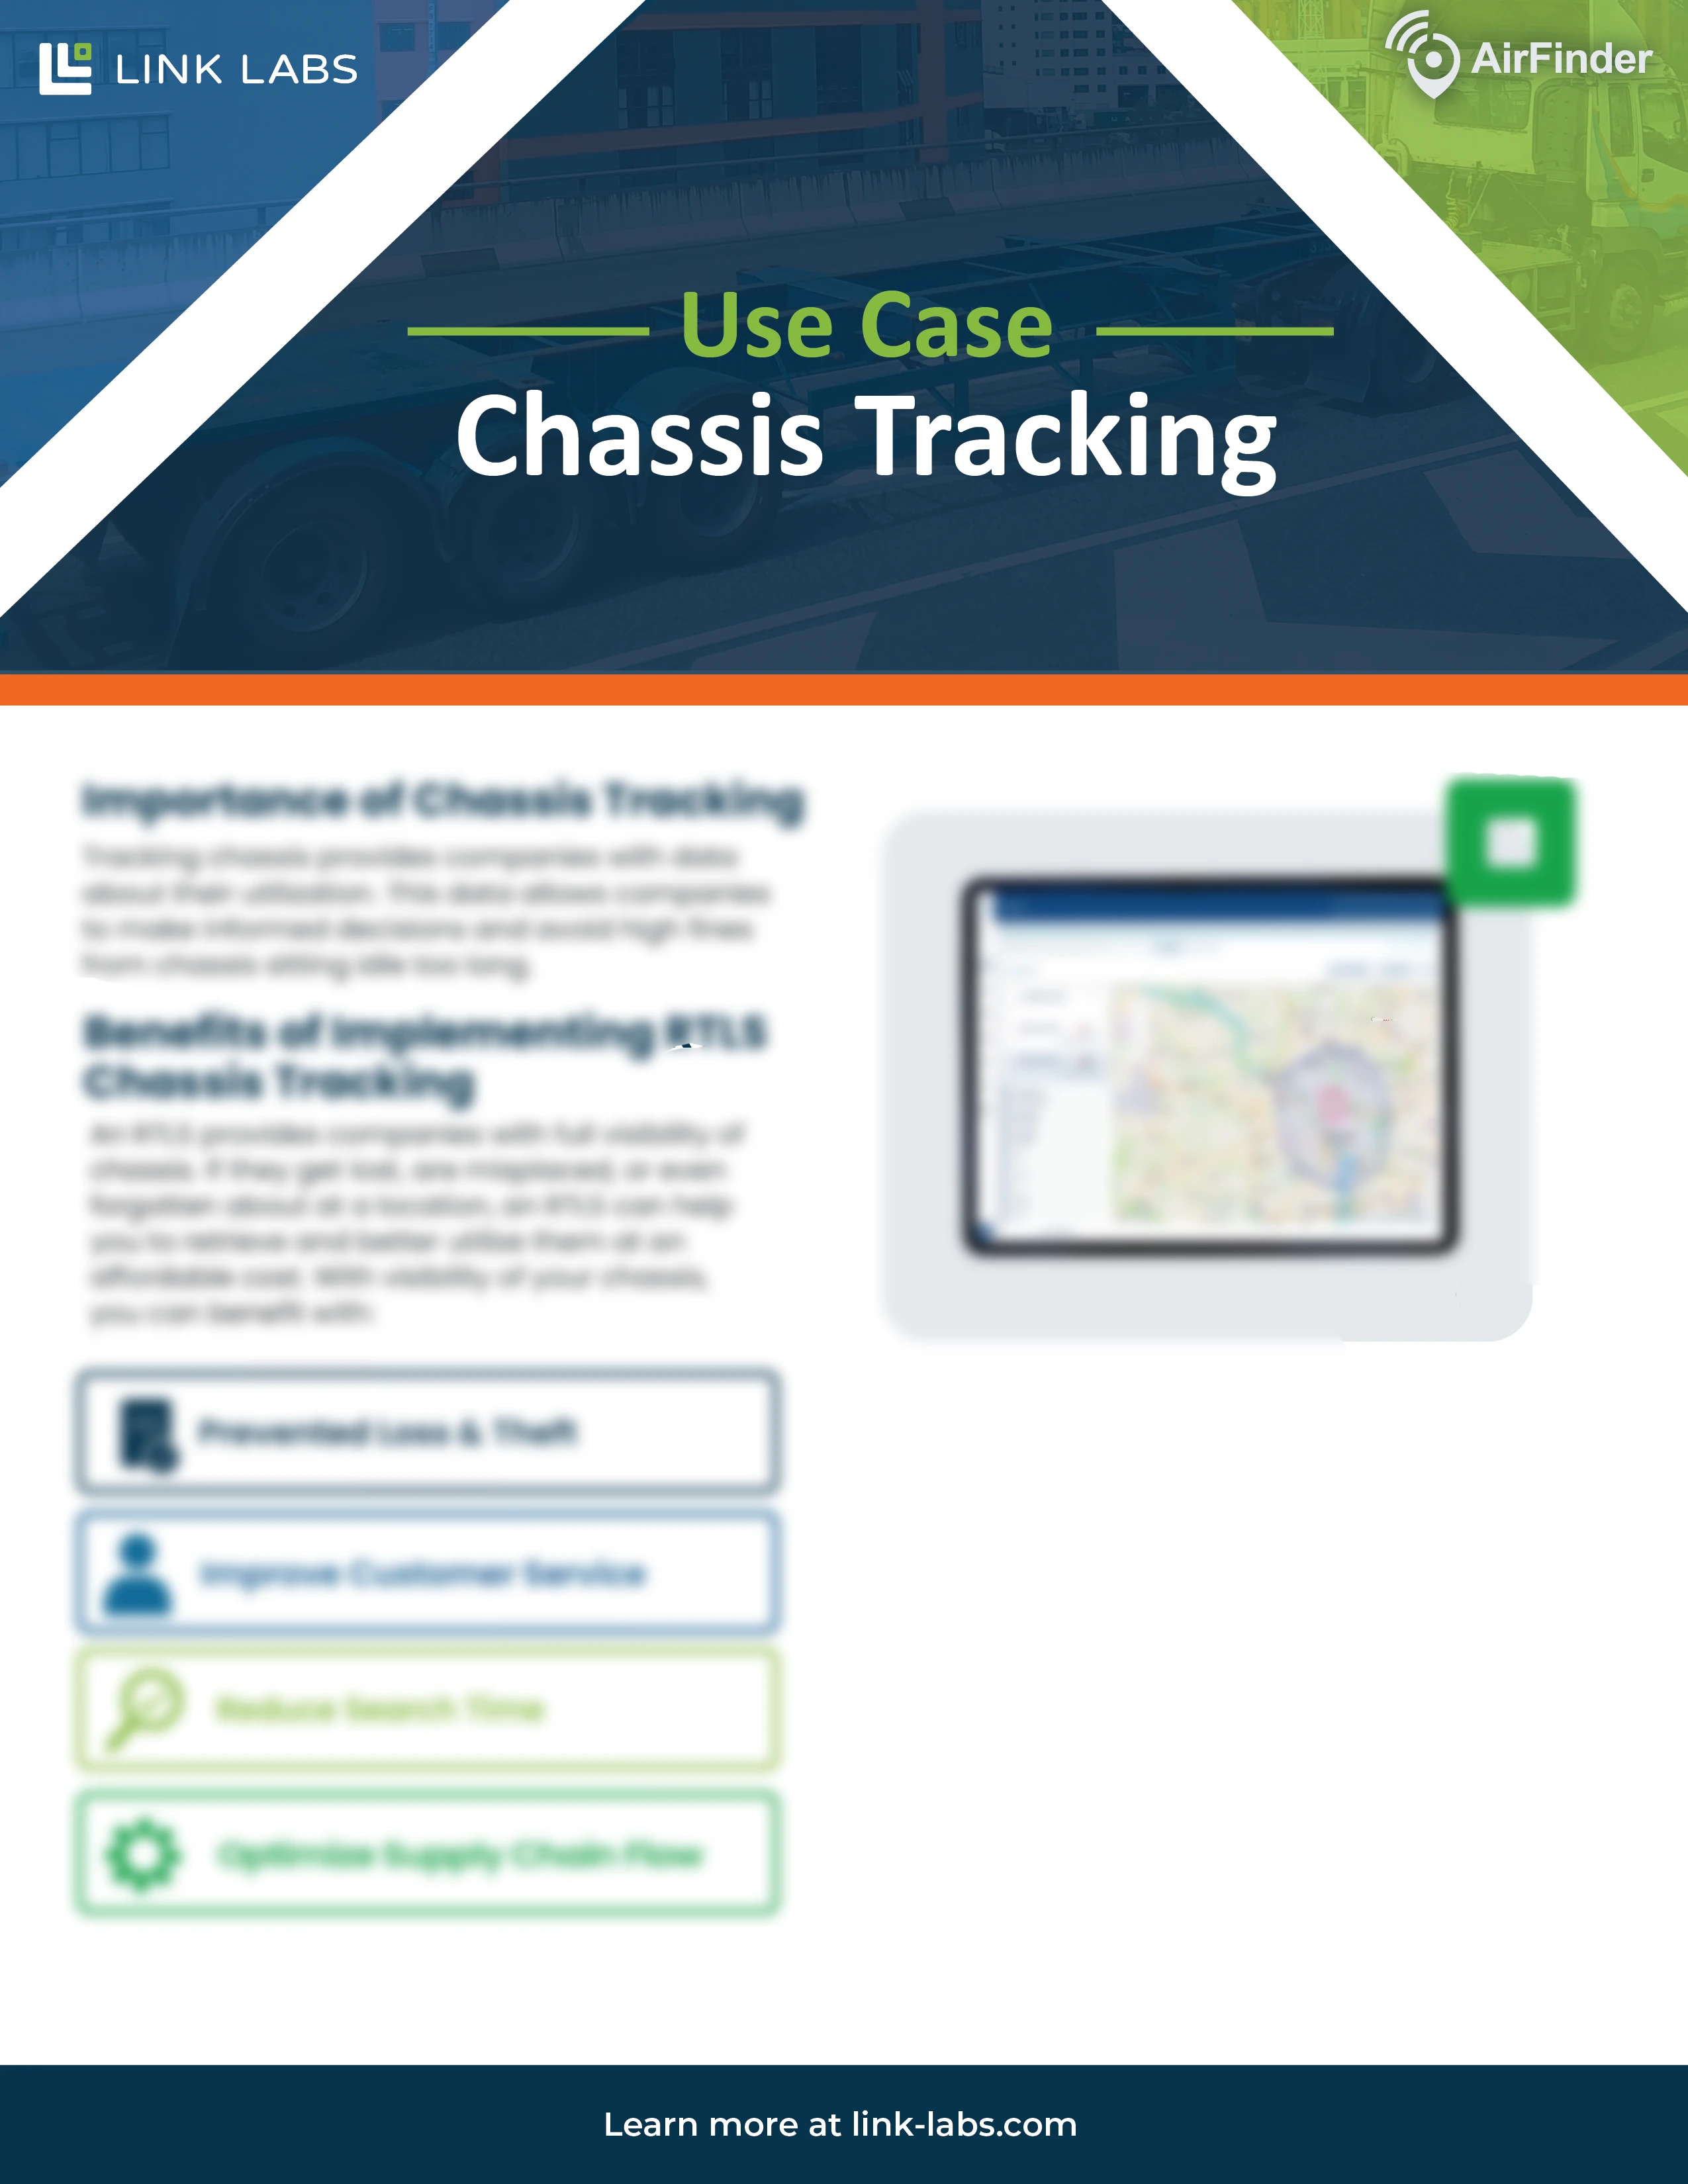 Chassis Tracking